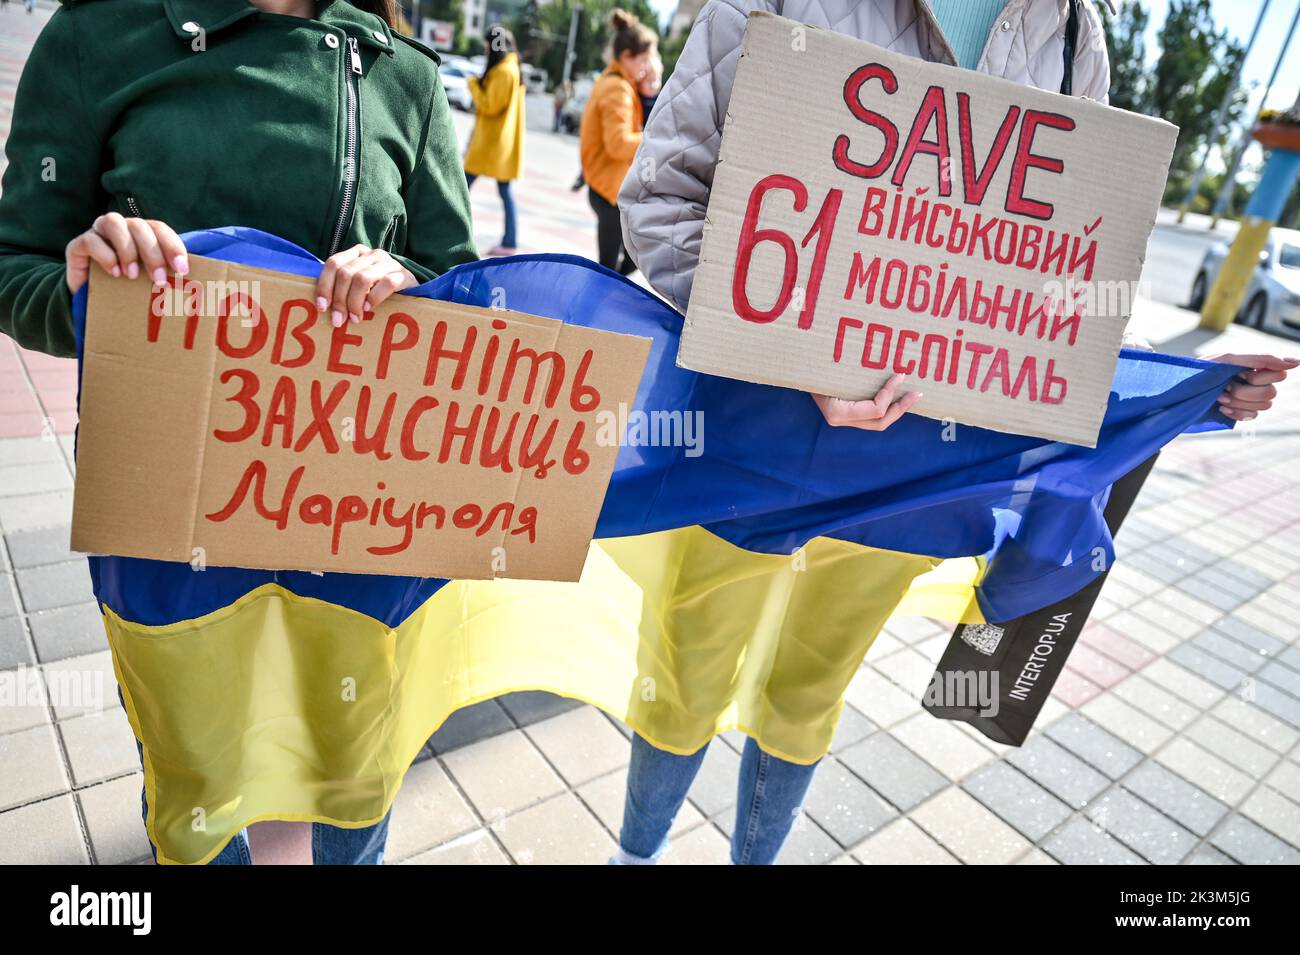 ZAPORIZHZHIA, UKRAINE - SEPTEMBER 25, 2022 - Activists hold placards calling for the release of Mariupol defenders and civilians who are currently in Stock Photo